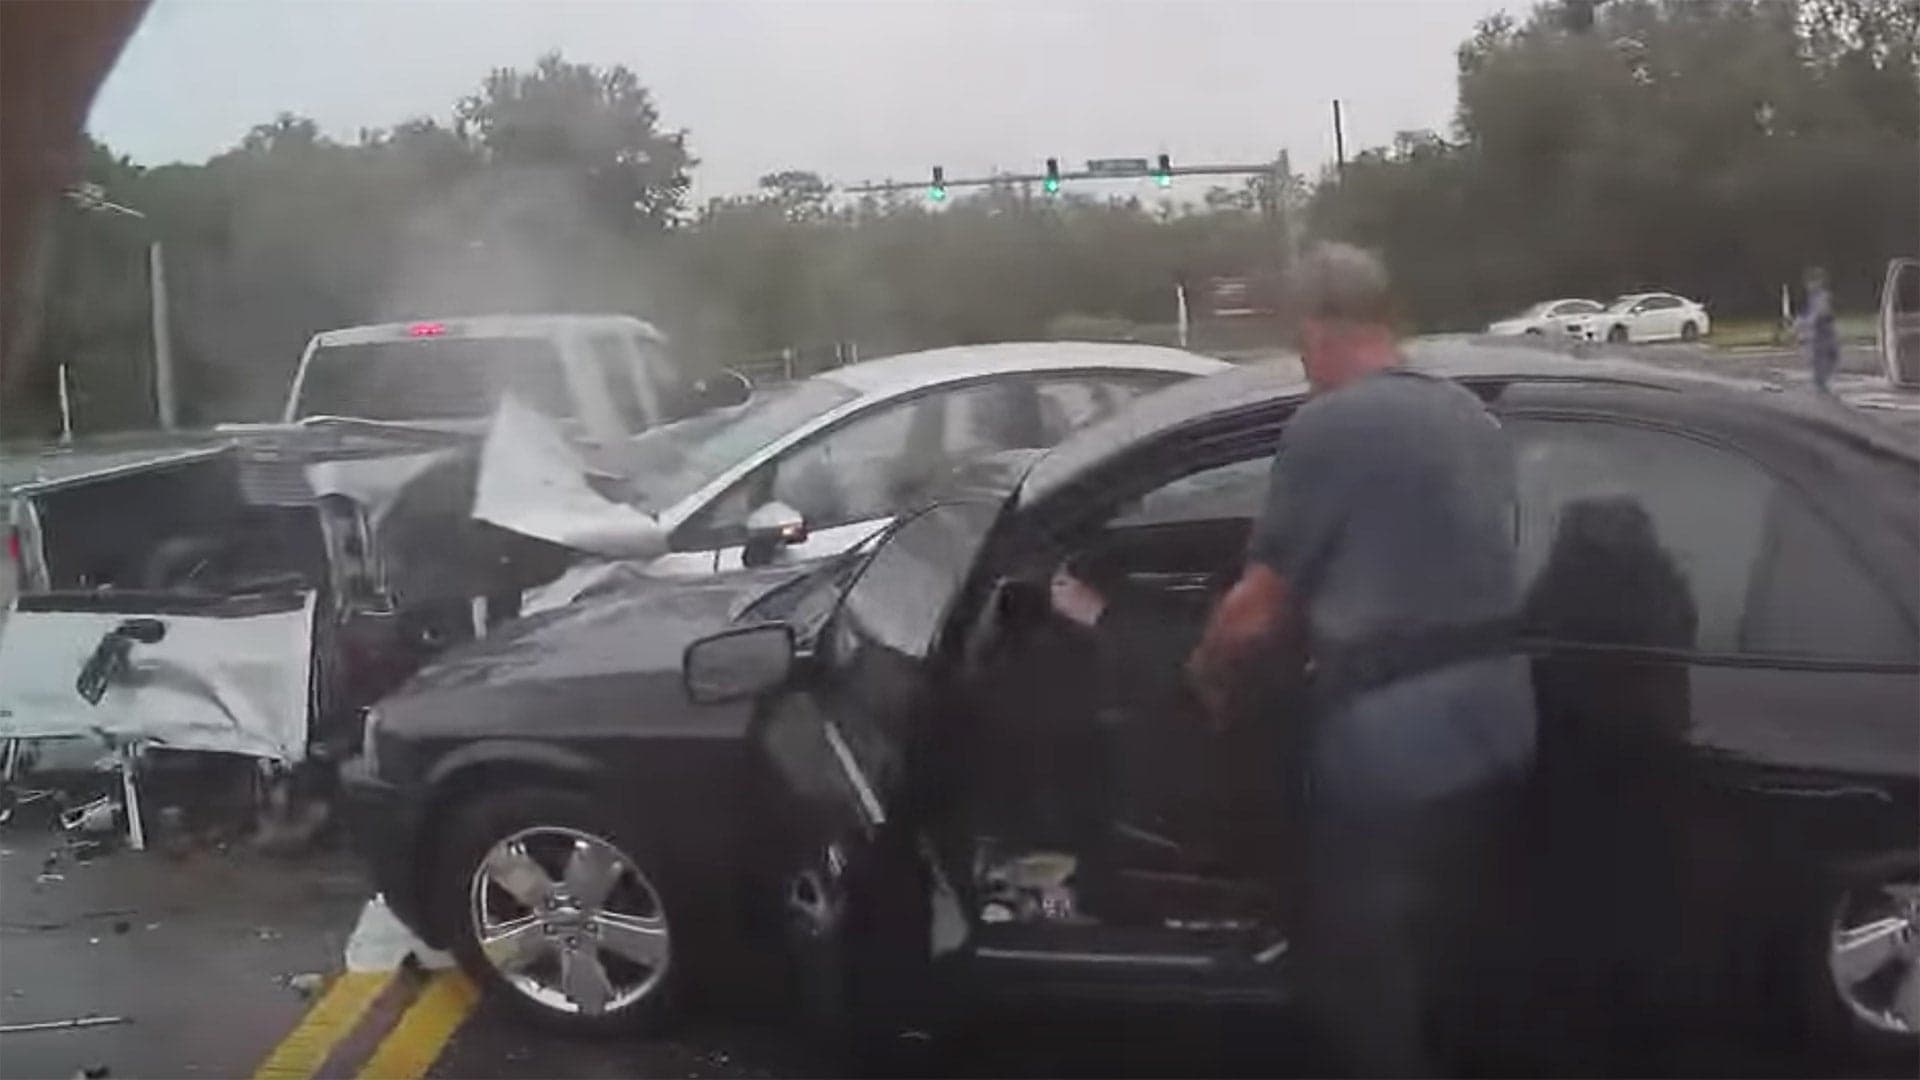 Dramatic Body Cam Footage Shows Car Careening Into Accident Scene